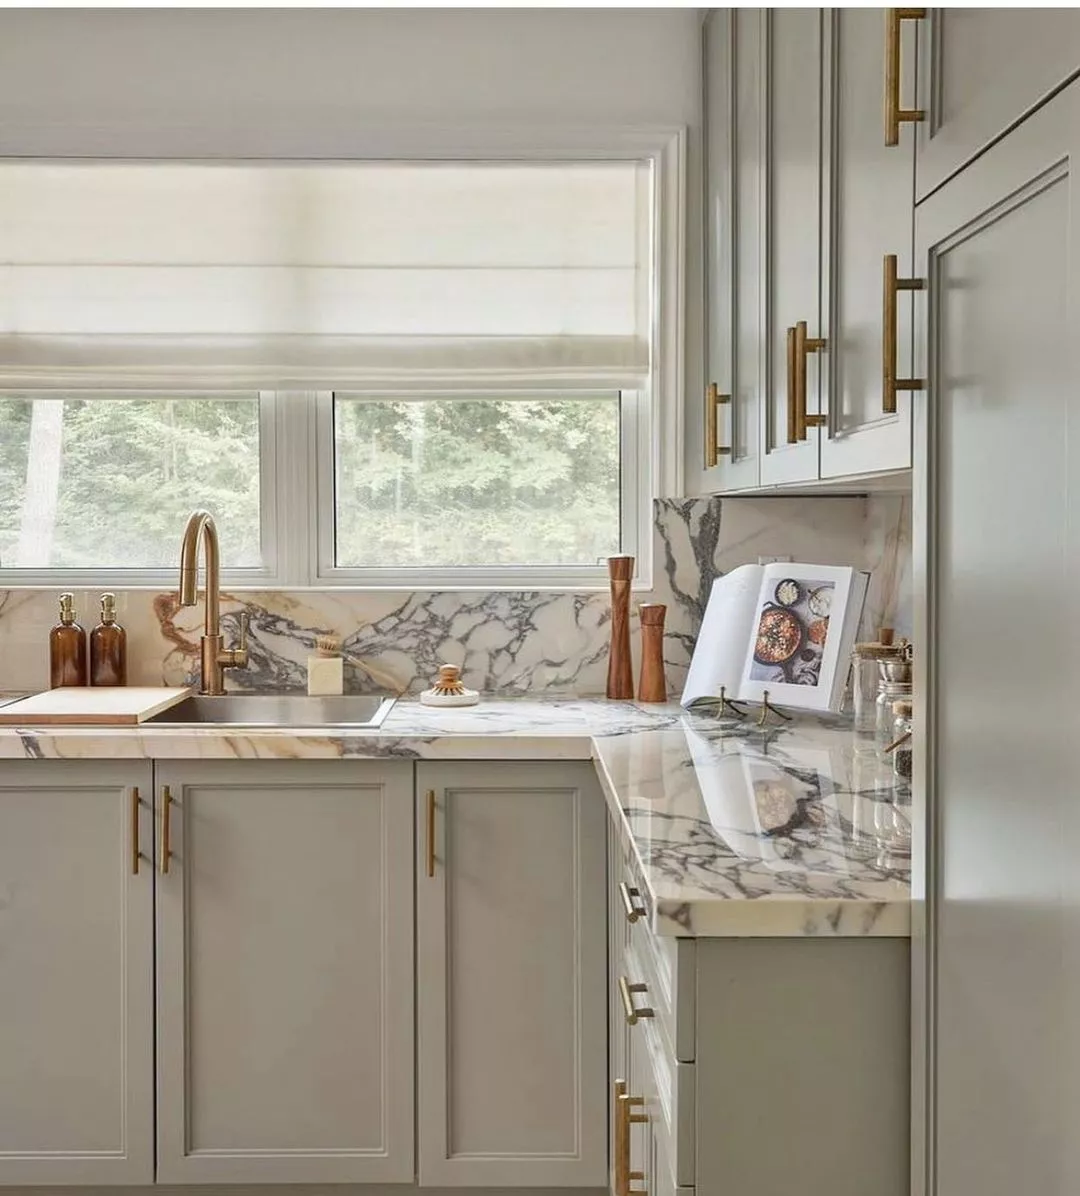 How To Match Your Countertop with Kitchen Cabinets – Refer To This